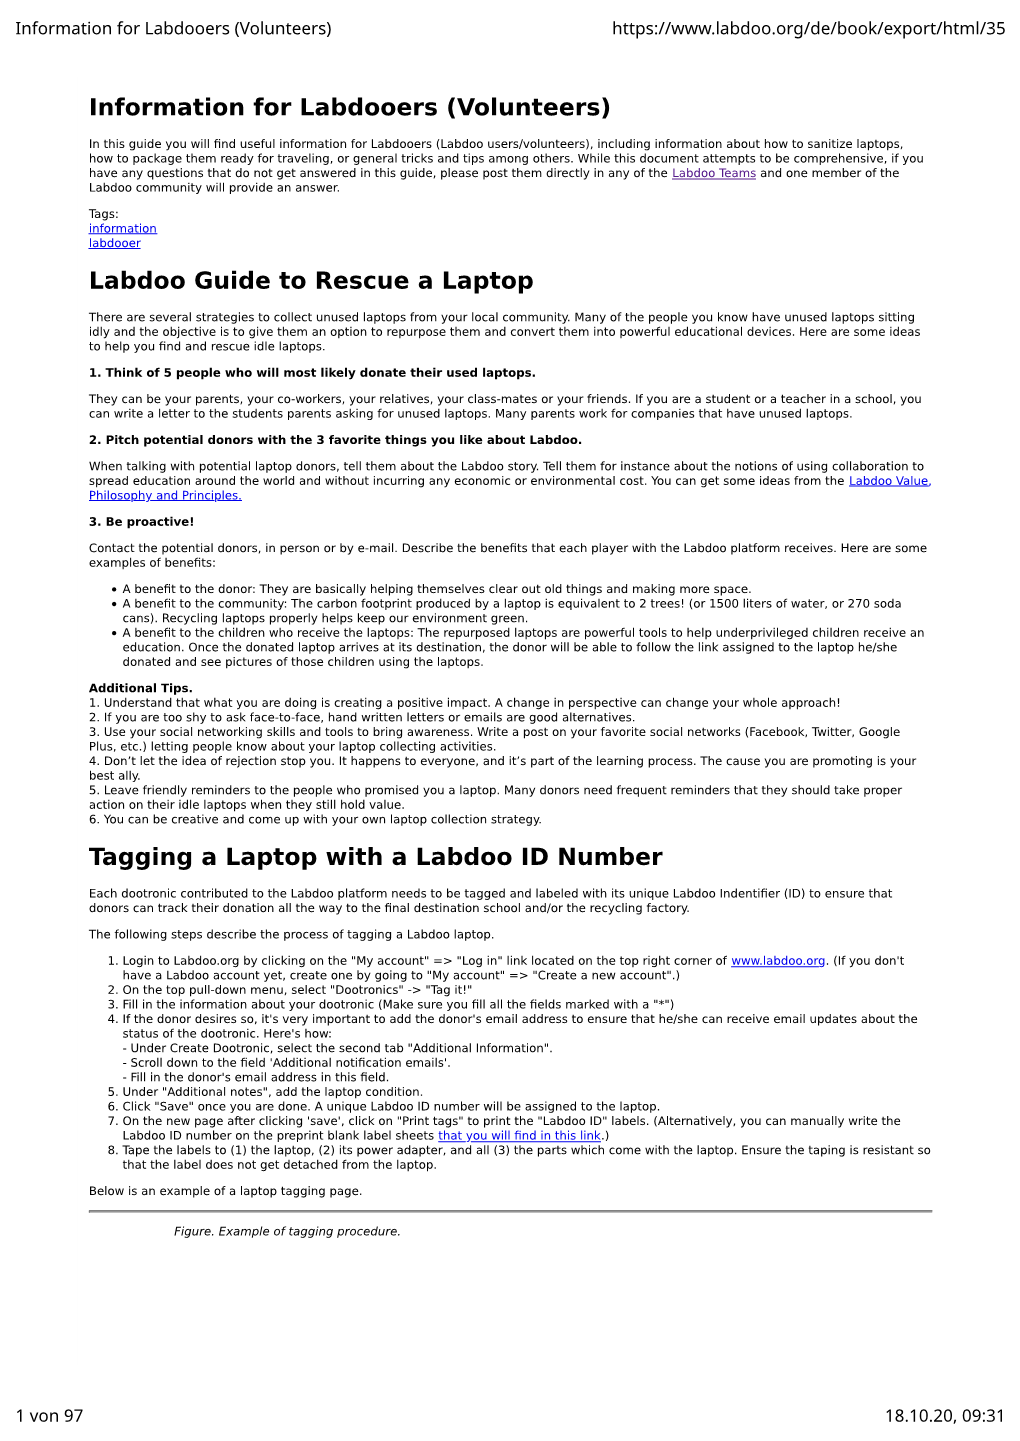 Information for Labdooers (Volunteers) Labdoo Guide to Rescue A